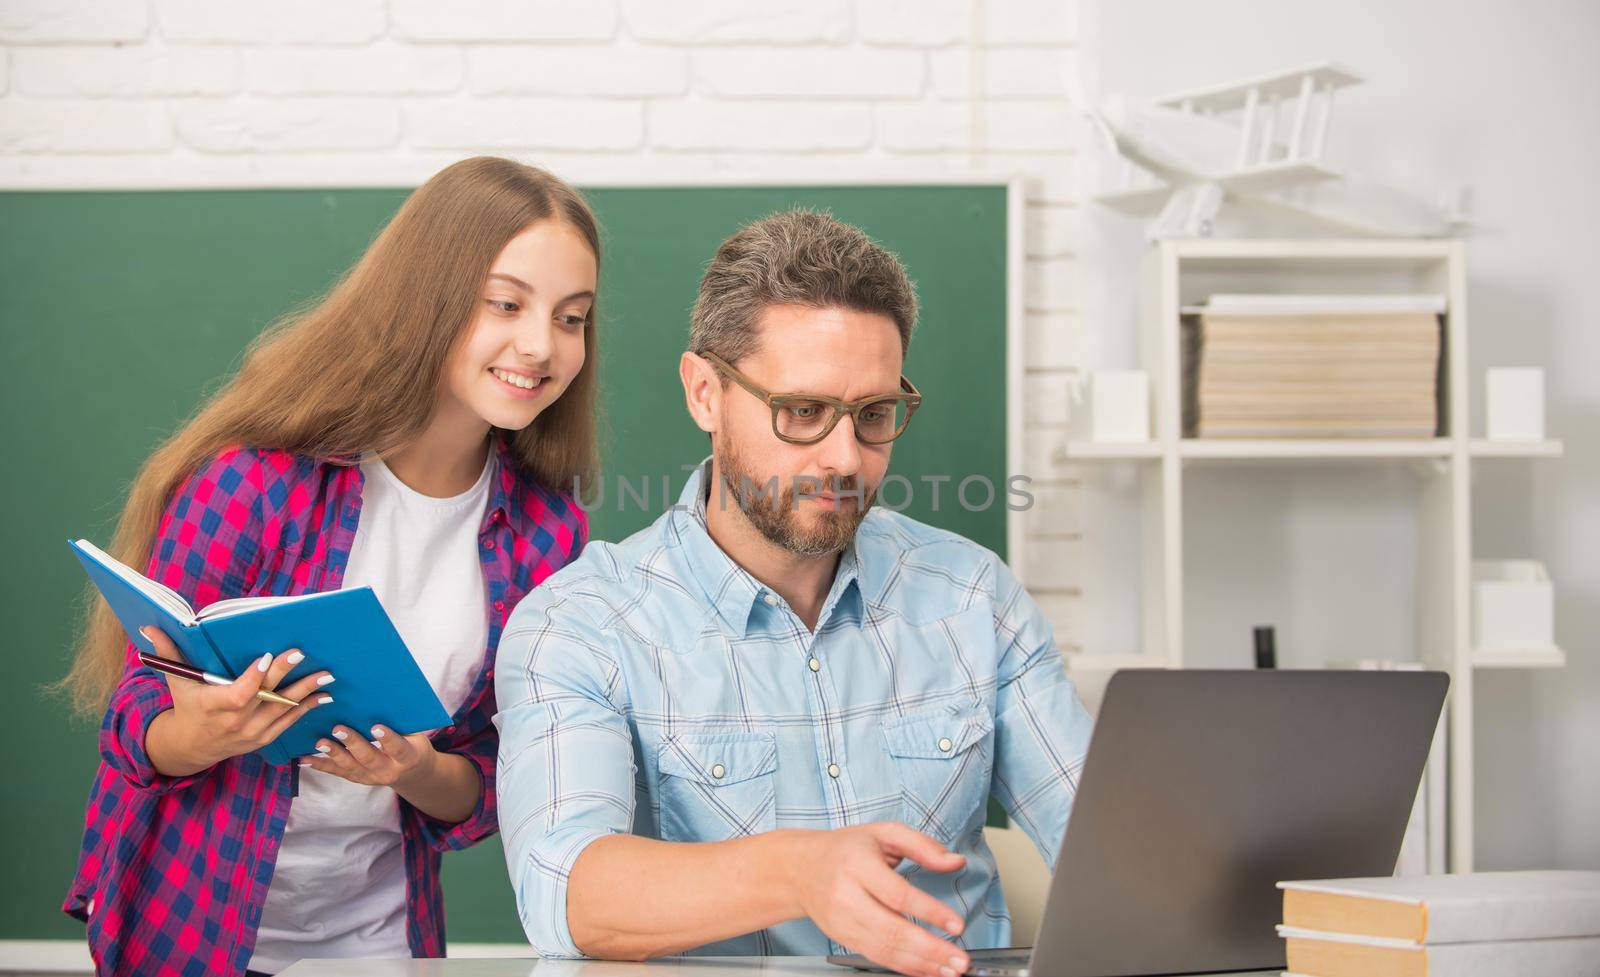 busy father and child study at school with book and laptop on blackboard background, parenthood.